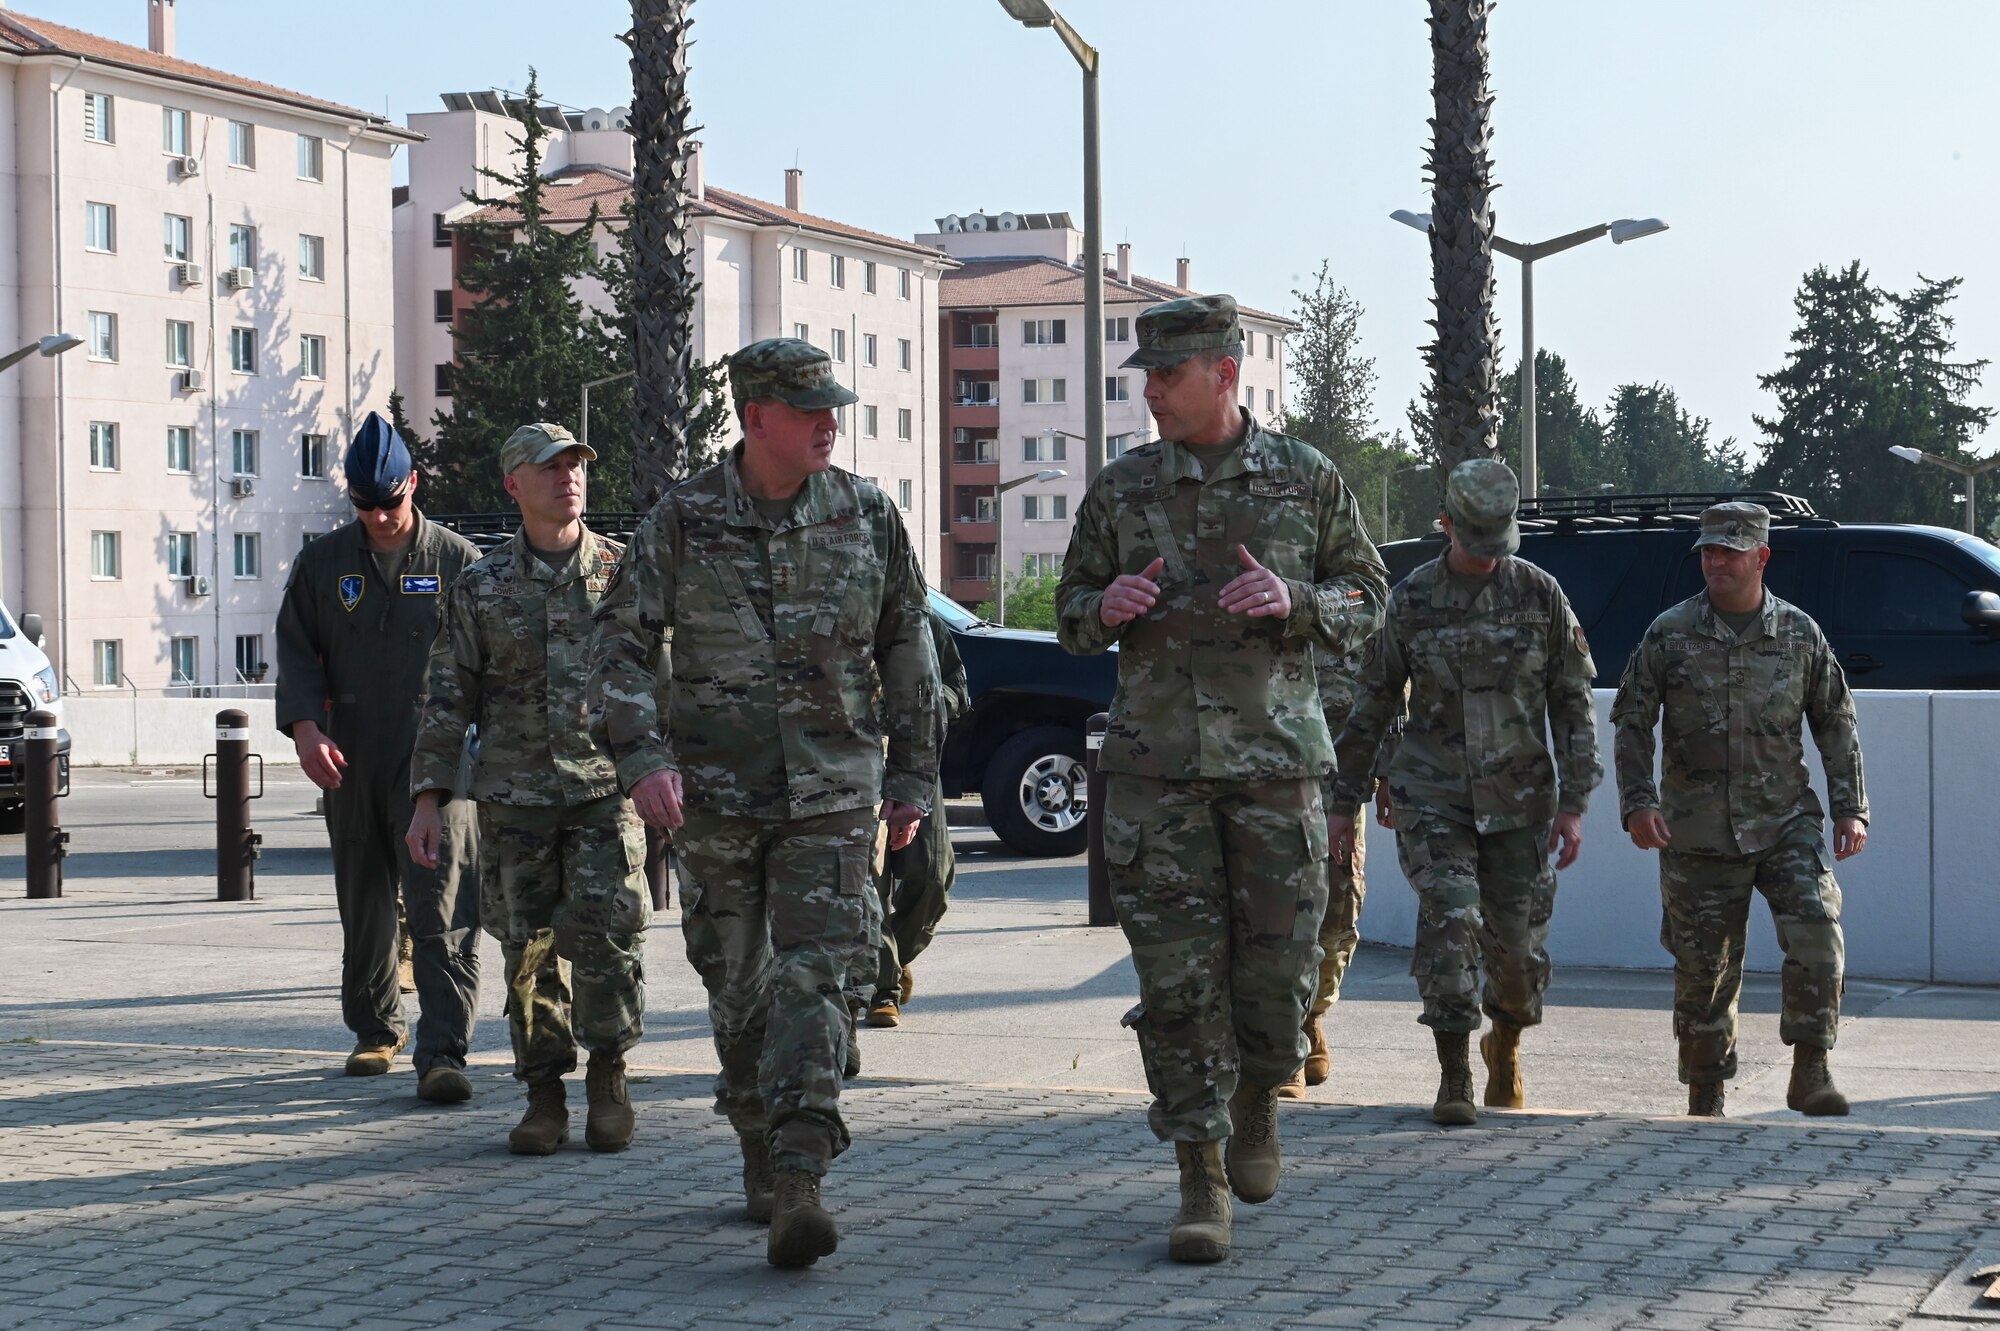 Gen. James B. Hecker, center left, U.S. Air Forces in Europe and Air Forces Africa commander, speaks with Col. Scott Carbaugh, center right, 39th Medical Group commander, during his visit to Incirlik Air Base, Turkey, Aug. 4, 2022. Hecker met with several Airmen and received briefings about the wing’s mission and capabilities while speaking with members about how their role supports the mission of USAFE-AFAFRICA. The wing takes deliberate actions to develop Airmen and their families; confronts global challenges in support of the National Defense Strategy to defend our country and our allies; and utilizes dedicated efforts to deliver peace to our nation and its allies by fostering stability and deterring aggression throughout Europe and Africa. (U.S. Air Force photo by Staff Sgt. Matthew Angulo)